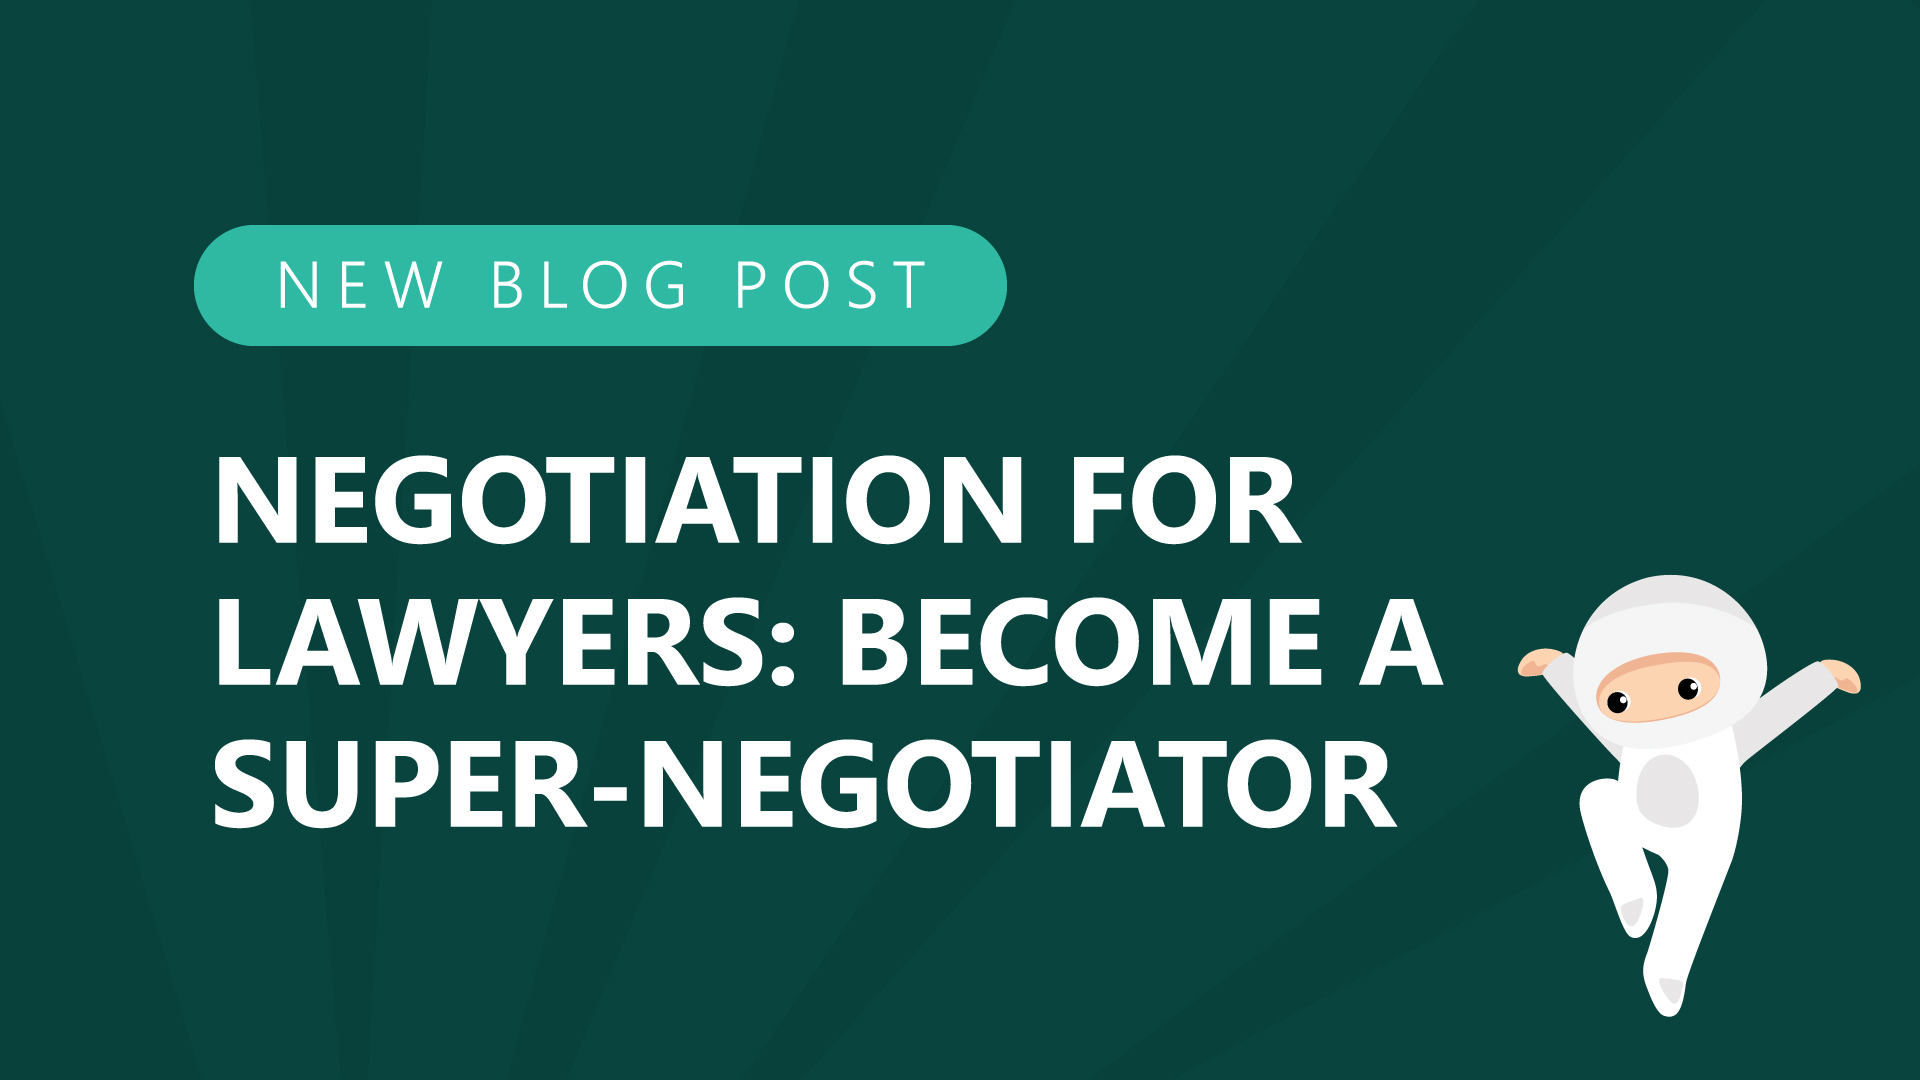 69-Negotiation-for-Lawyers-Become-a-Super-Negotiator.jpg